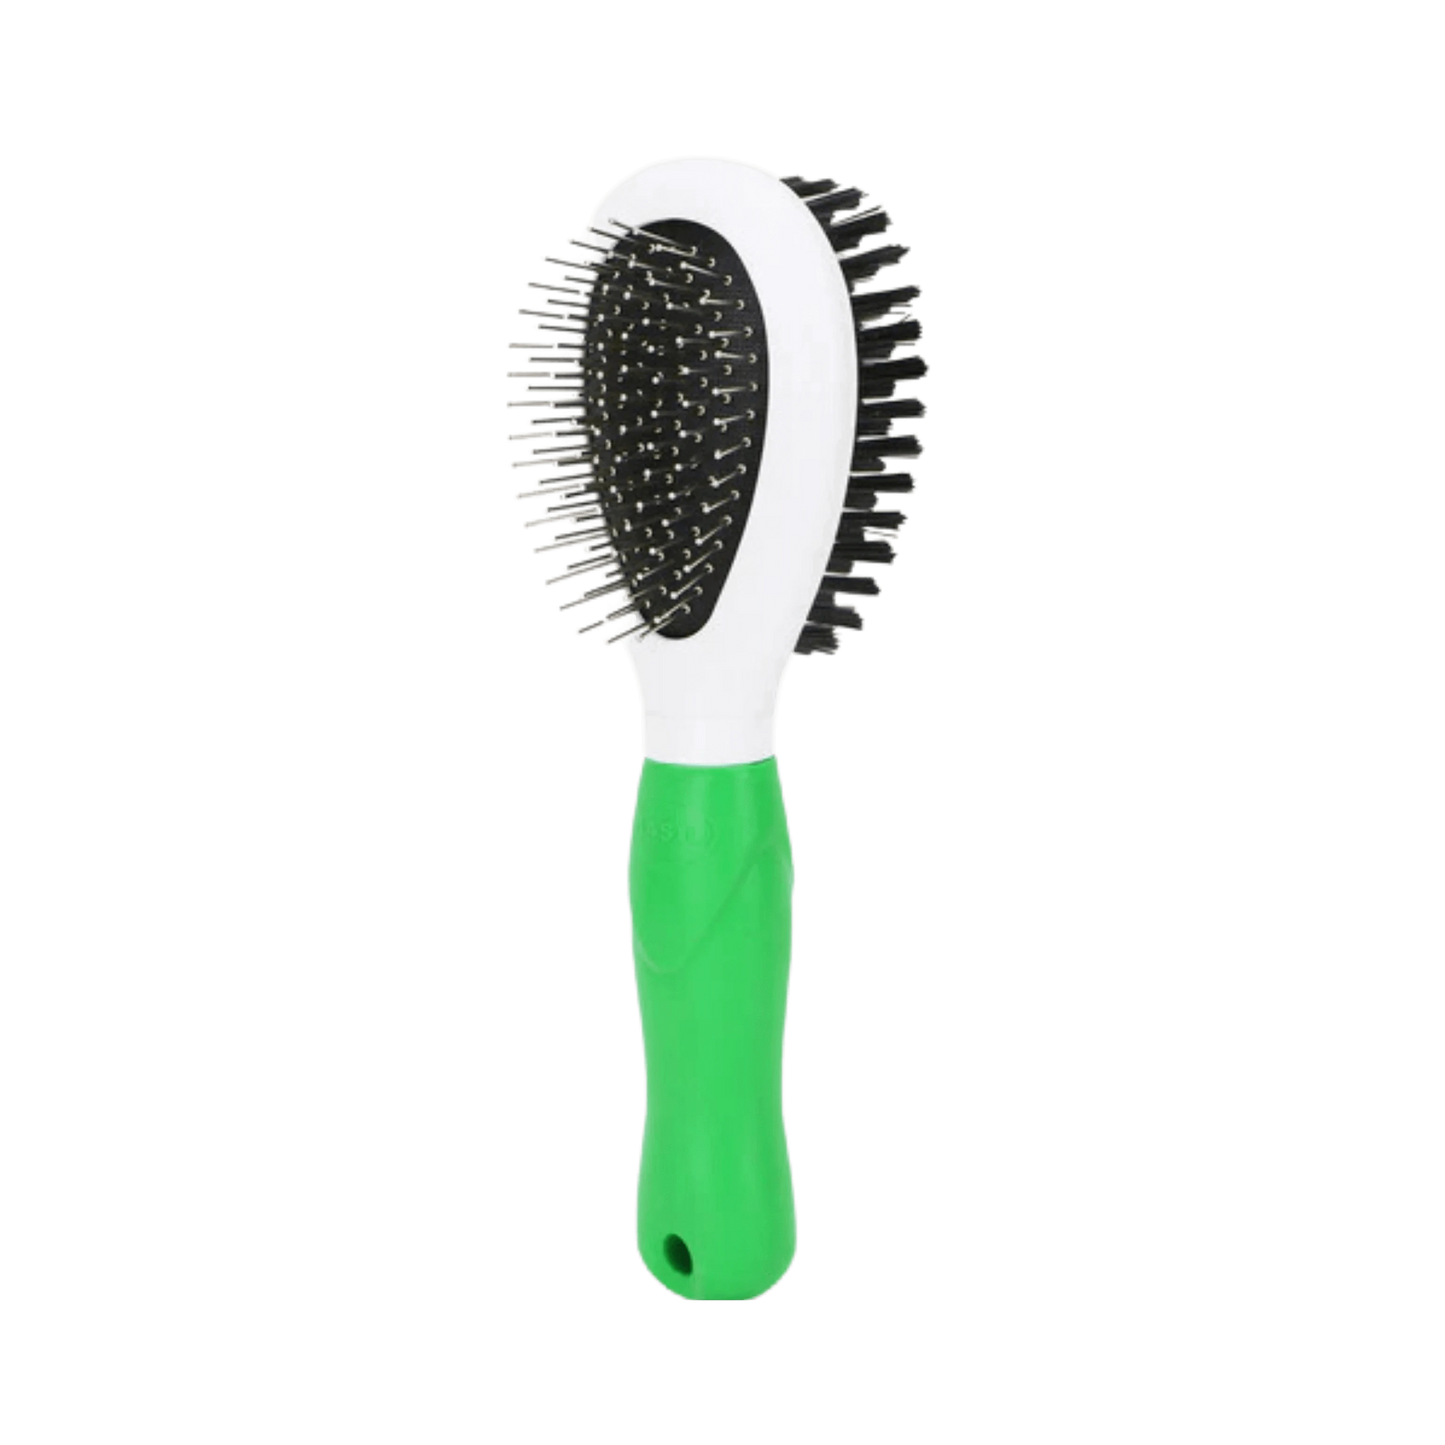 BS COMB 2 IN 1 PIN BRUSH 1PC